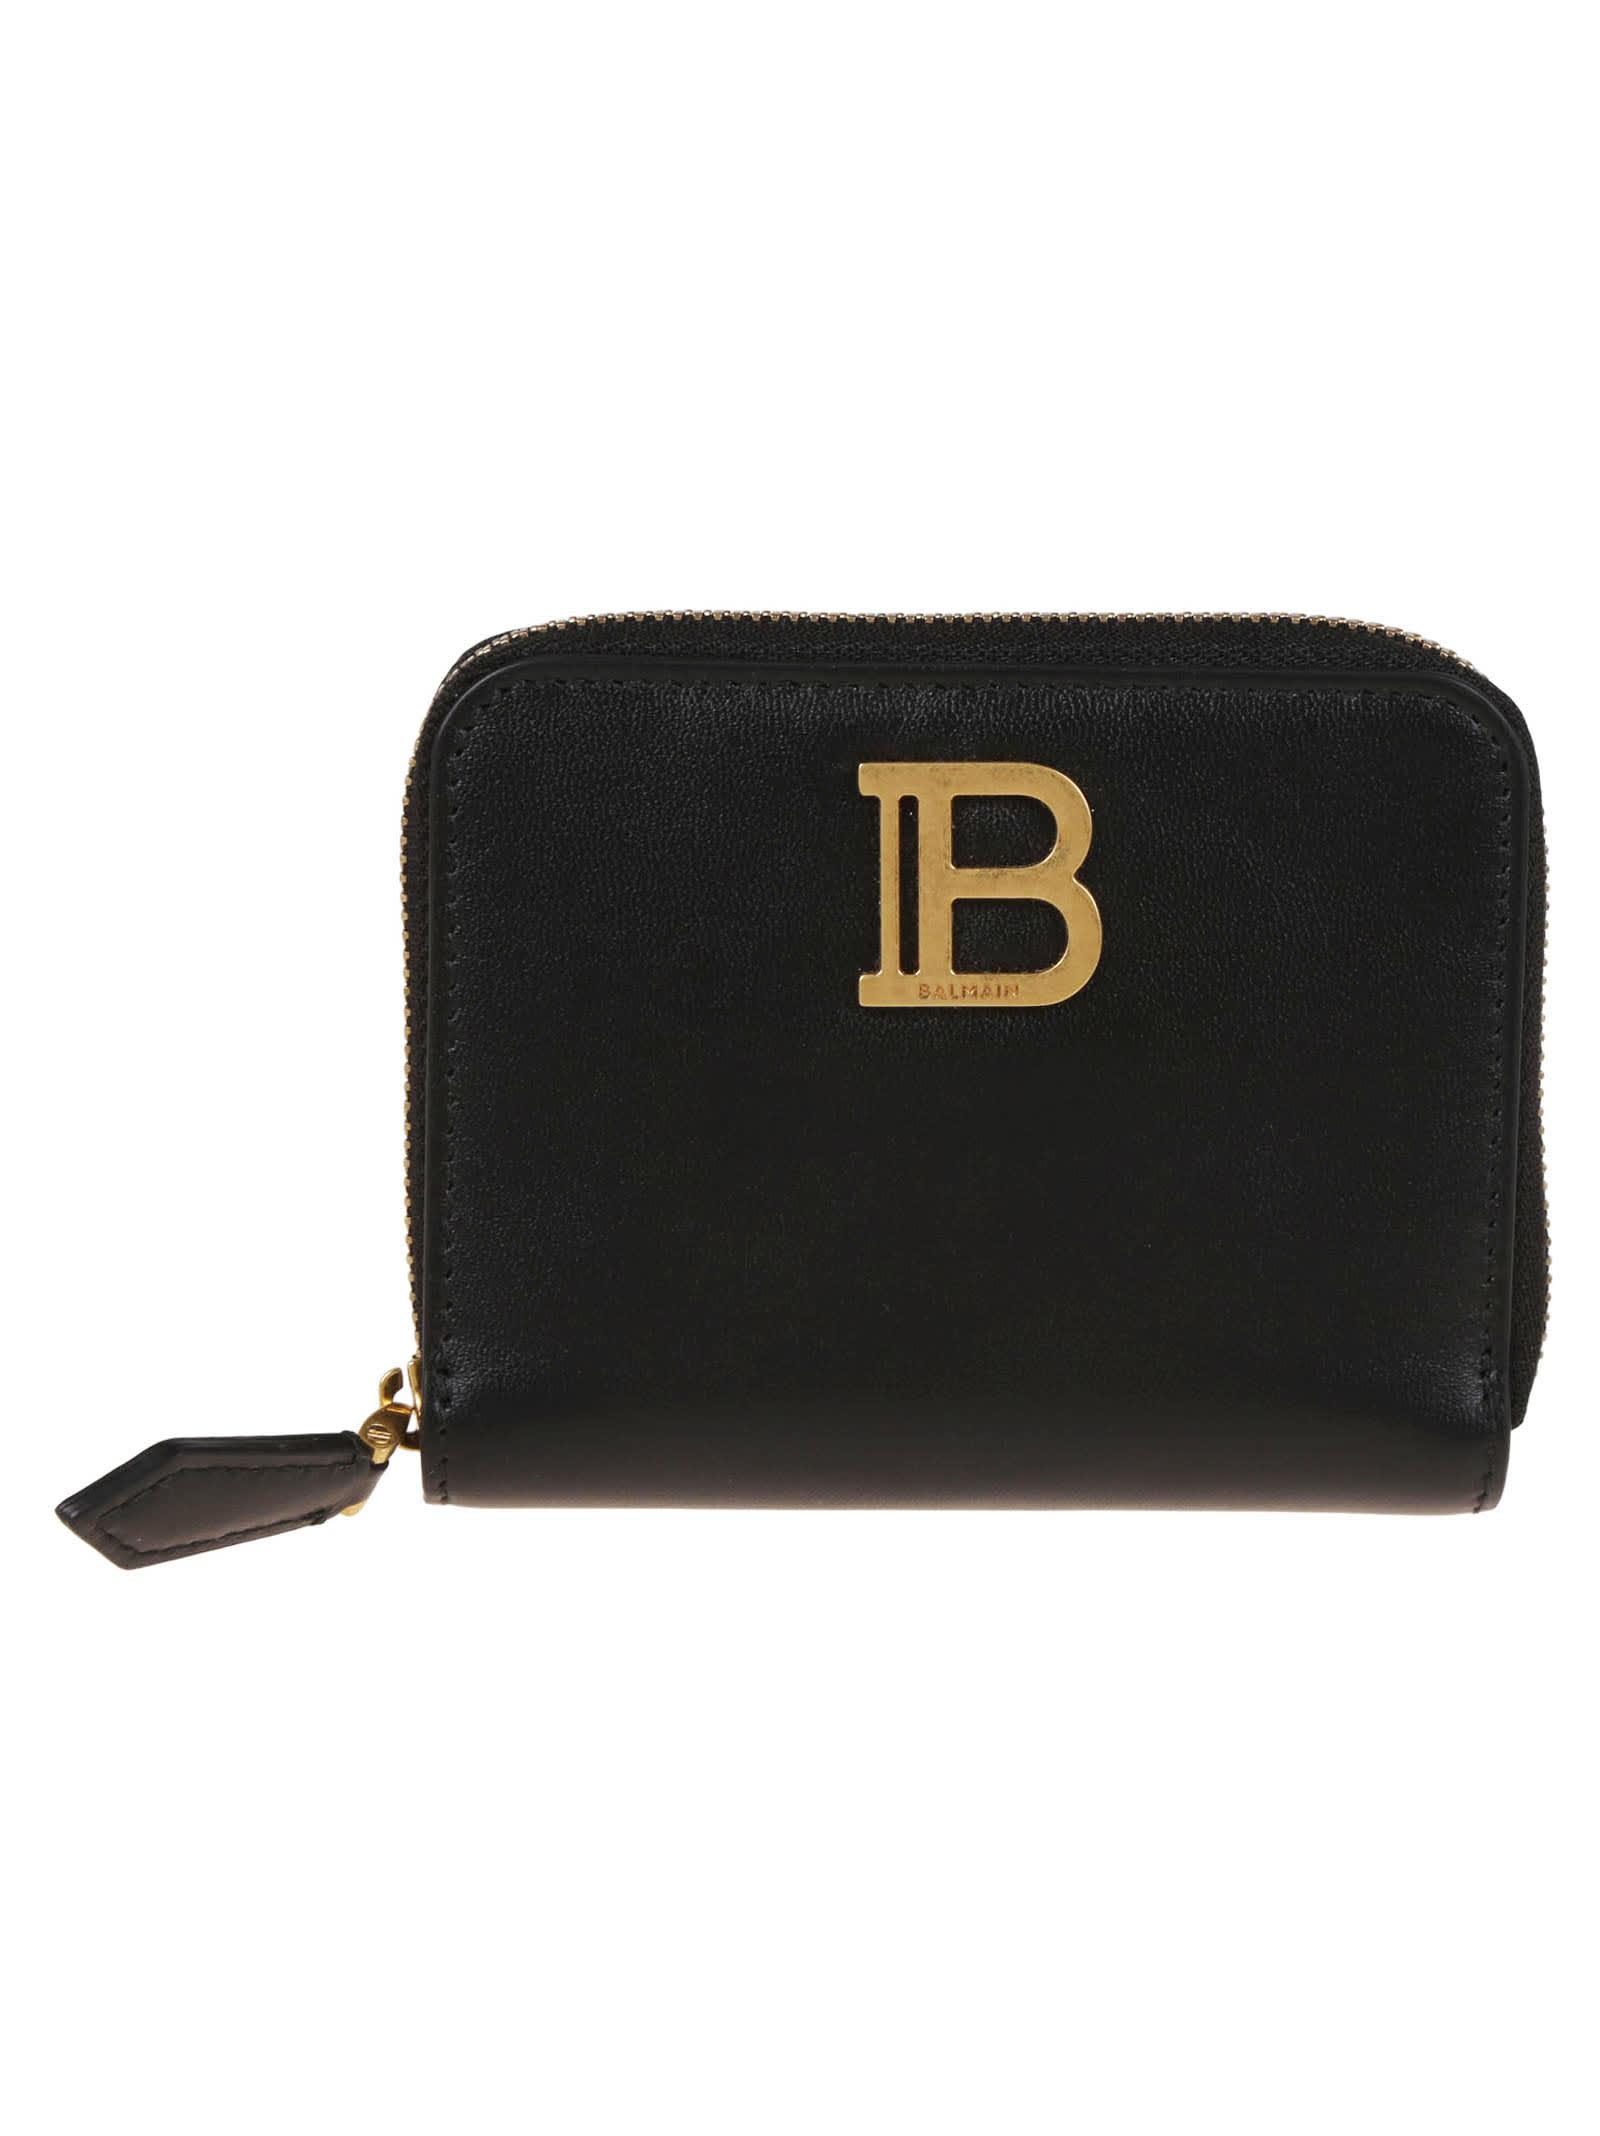 Balmain B-Buzz Patent Calfskin Leather Wallet on a Chain in 3Kb